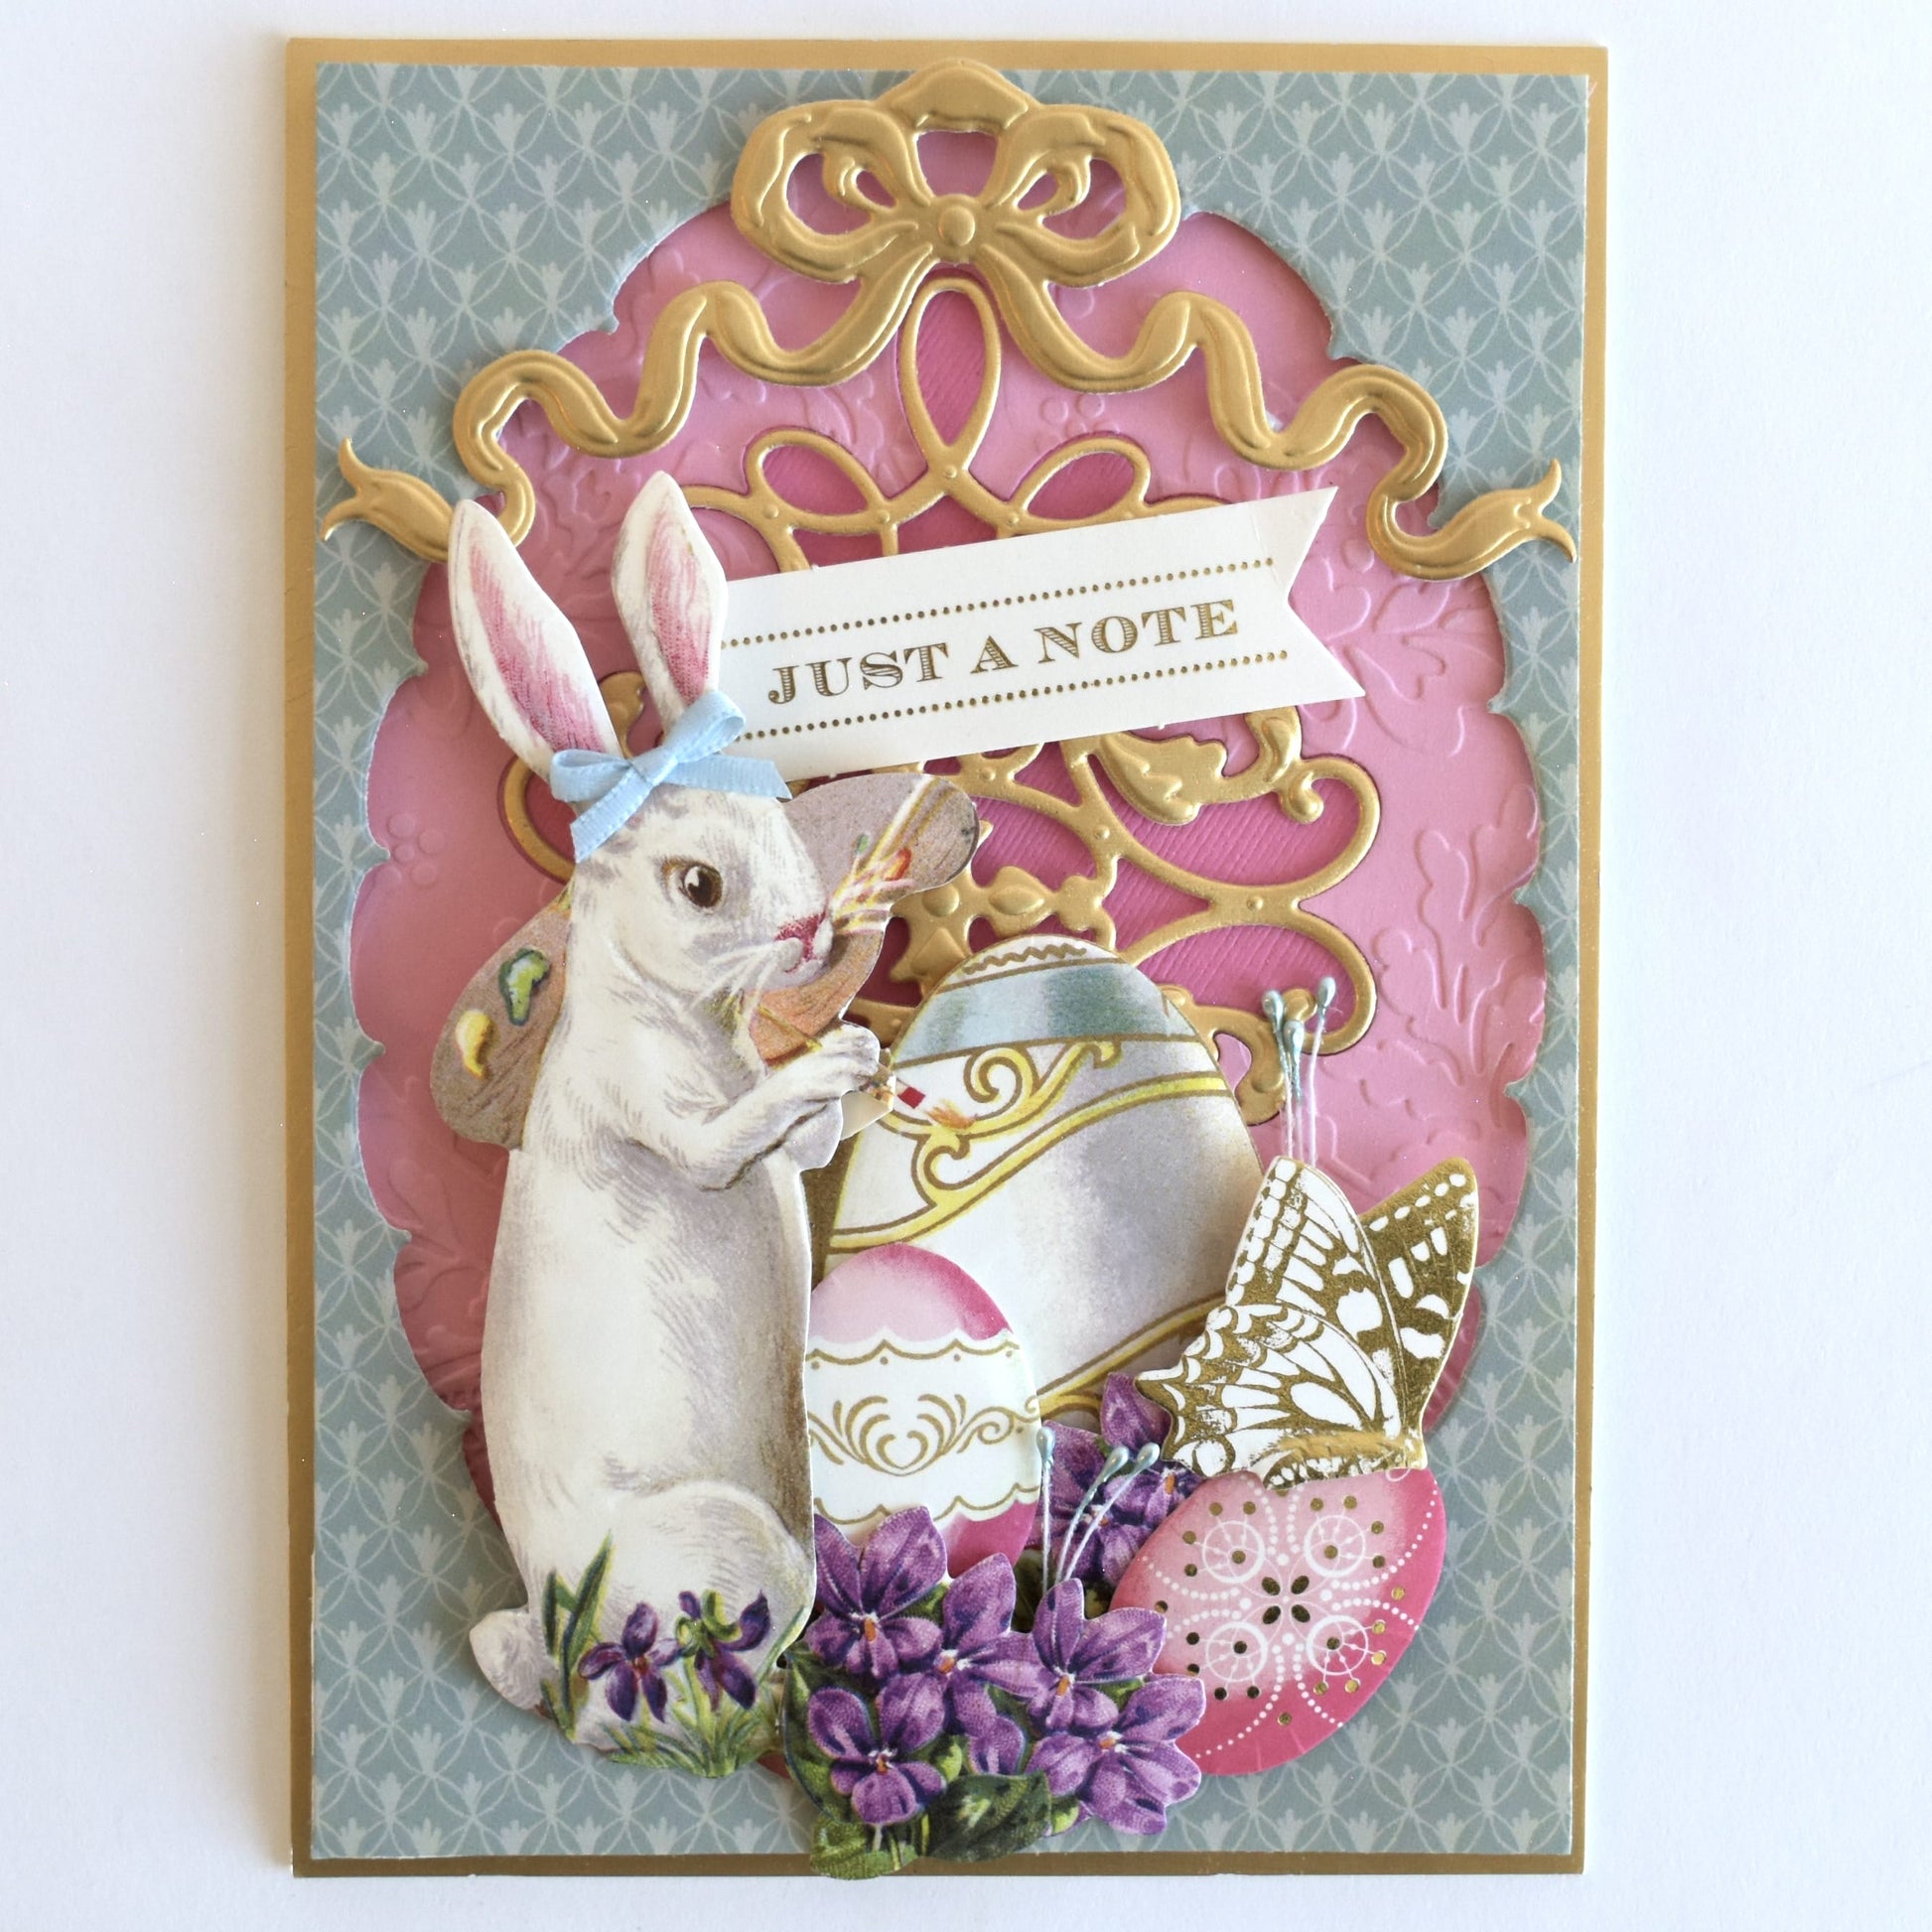 a card with a bunny holding a basket of eggs.